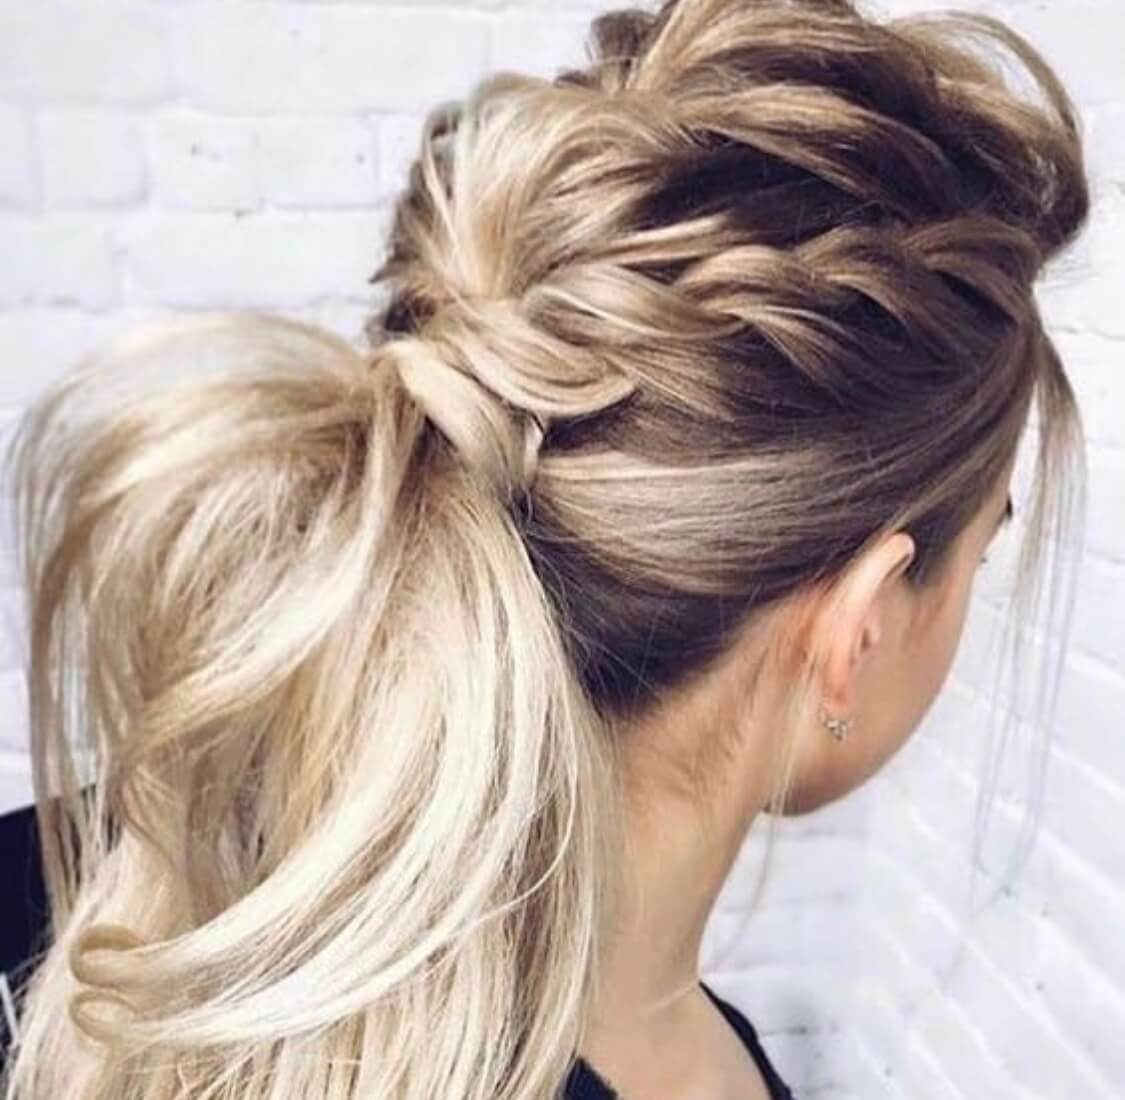 Ideas to go blonde - long warm balayage - allthestufficareabout.com